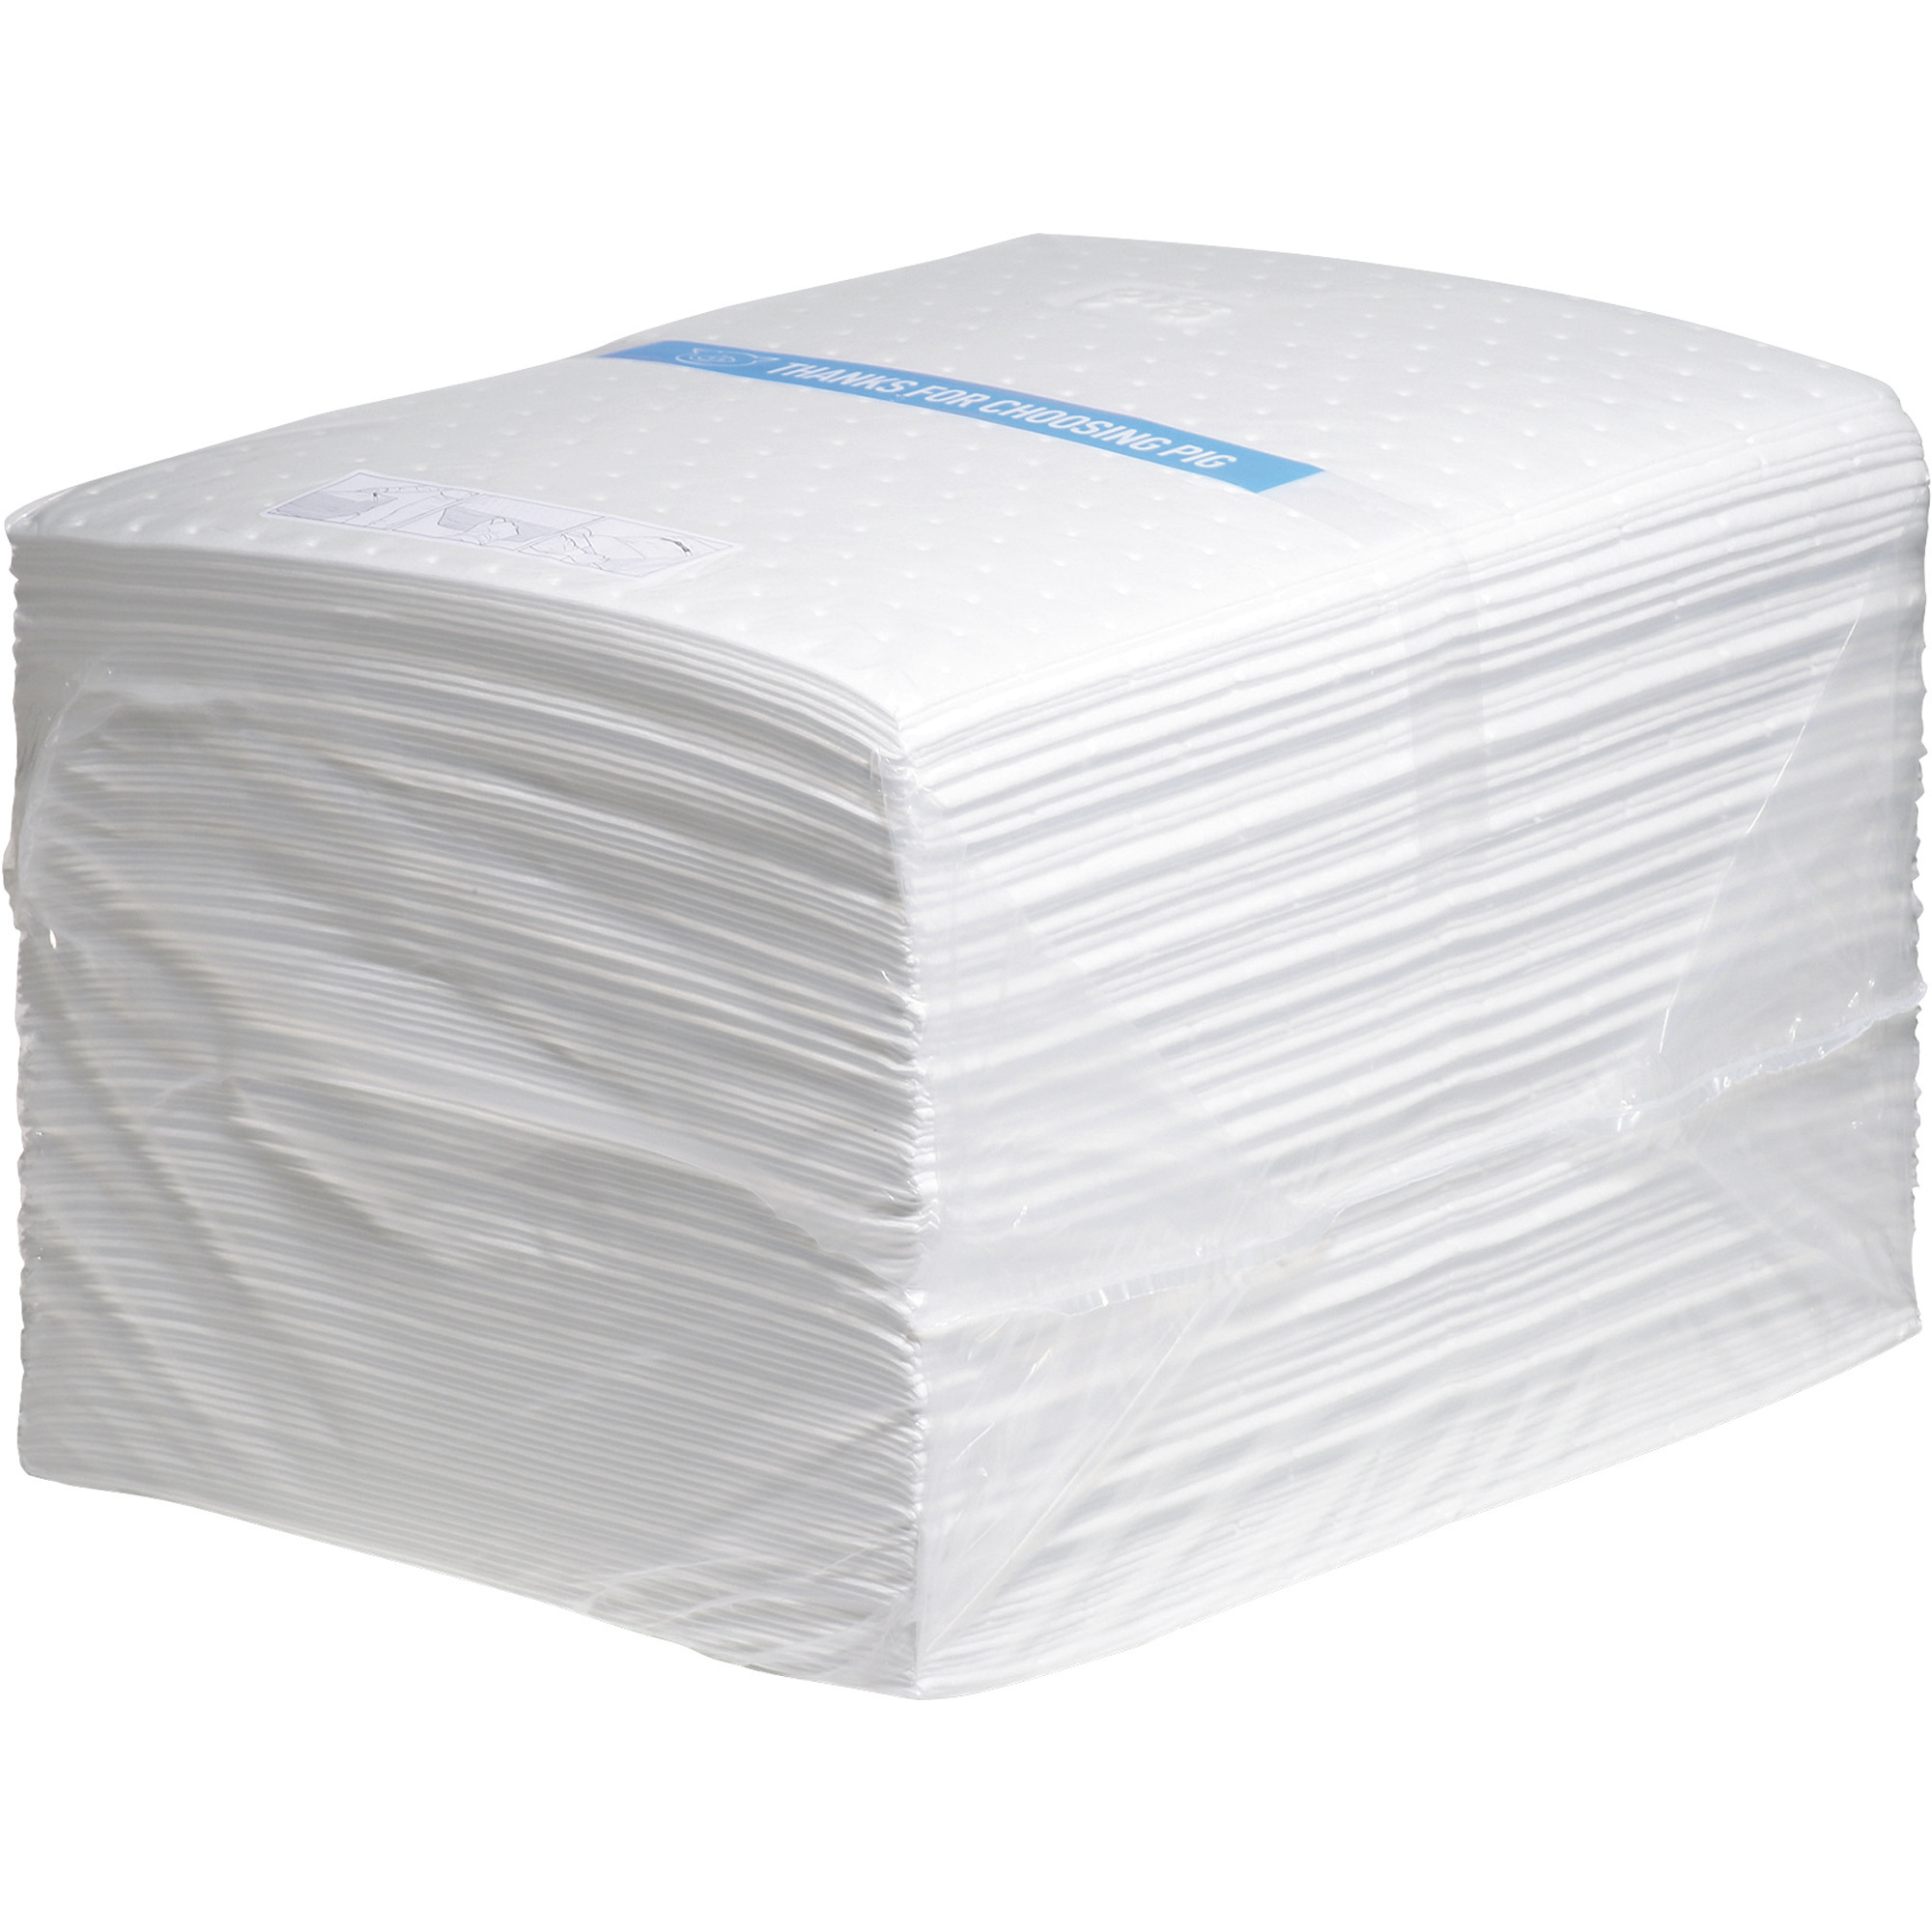 Oil-Only Heavyweight Absorbent Mat Pads — Bag of 100, 20Inch L x 15Inch W, Model - New Pig MAT403